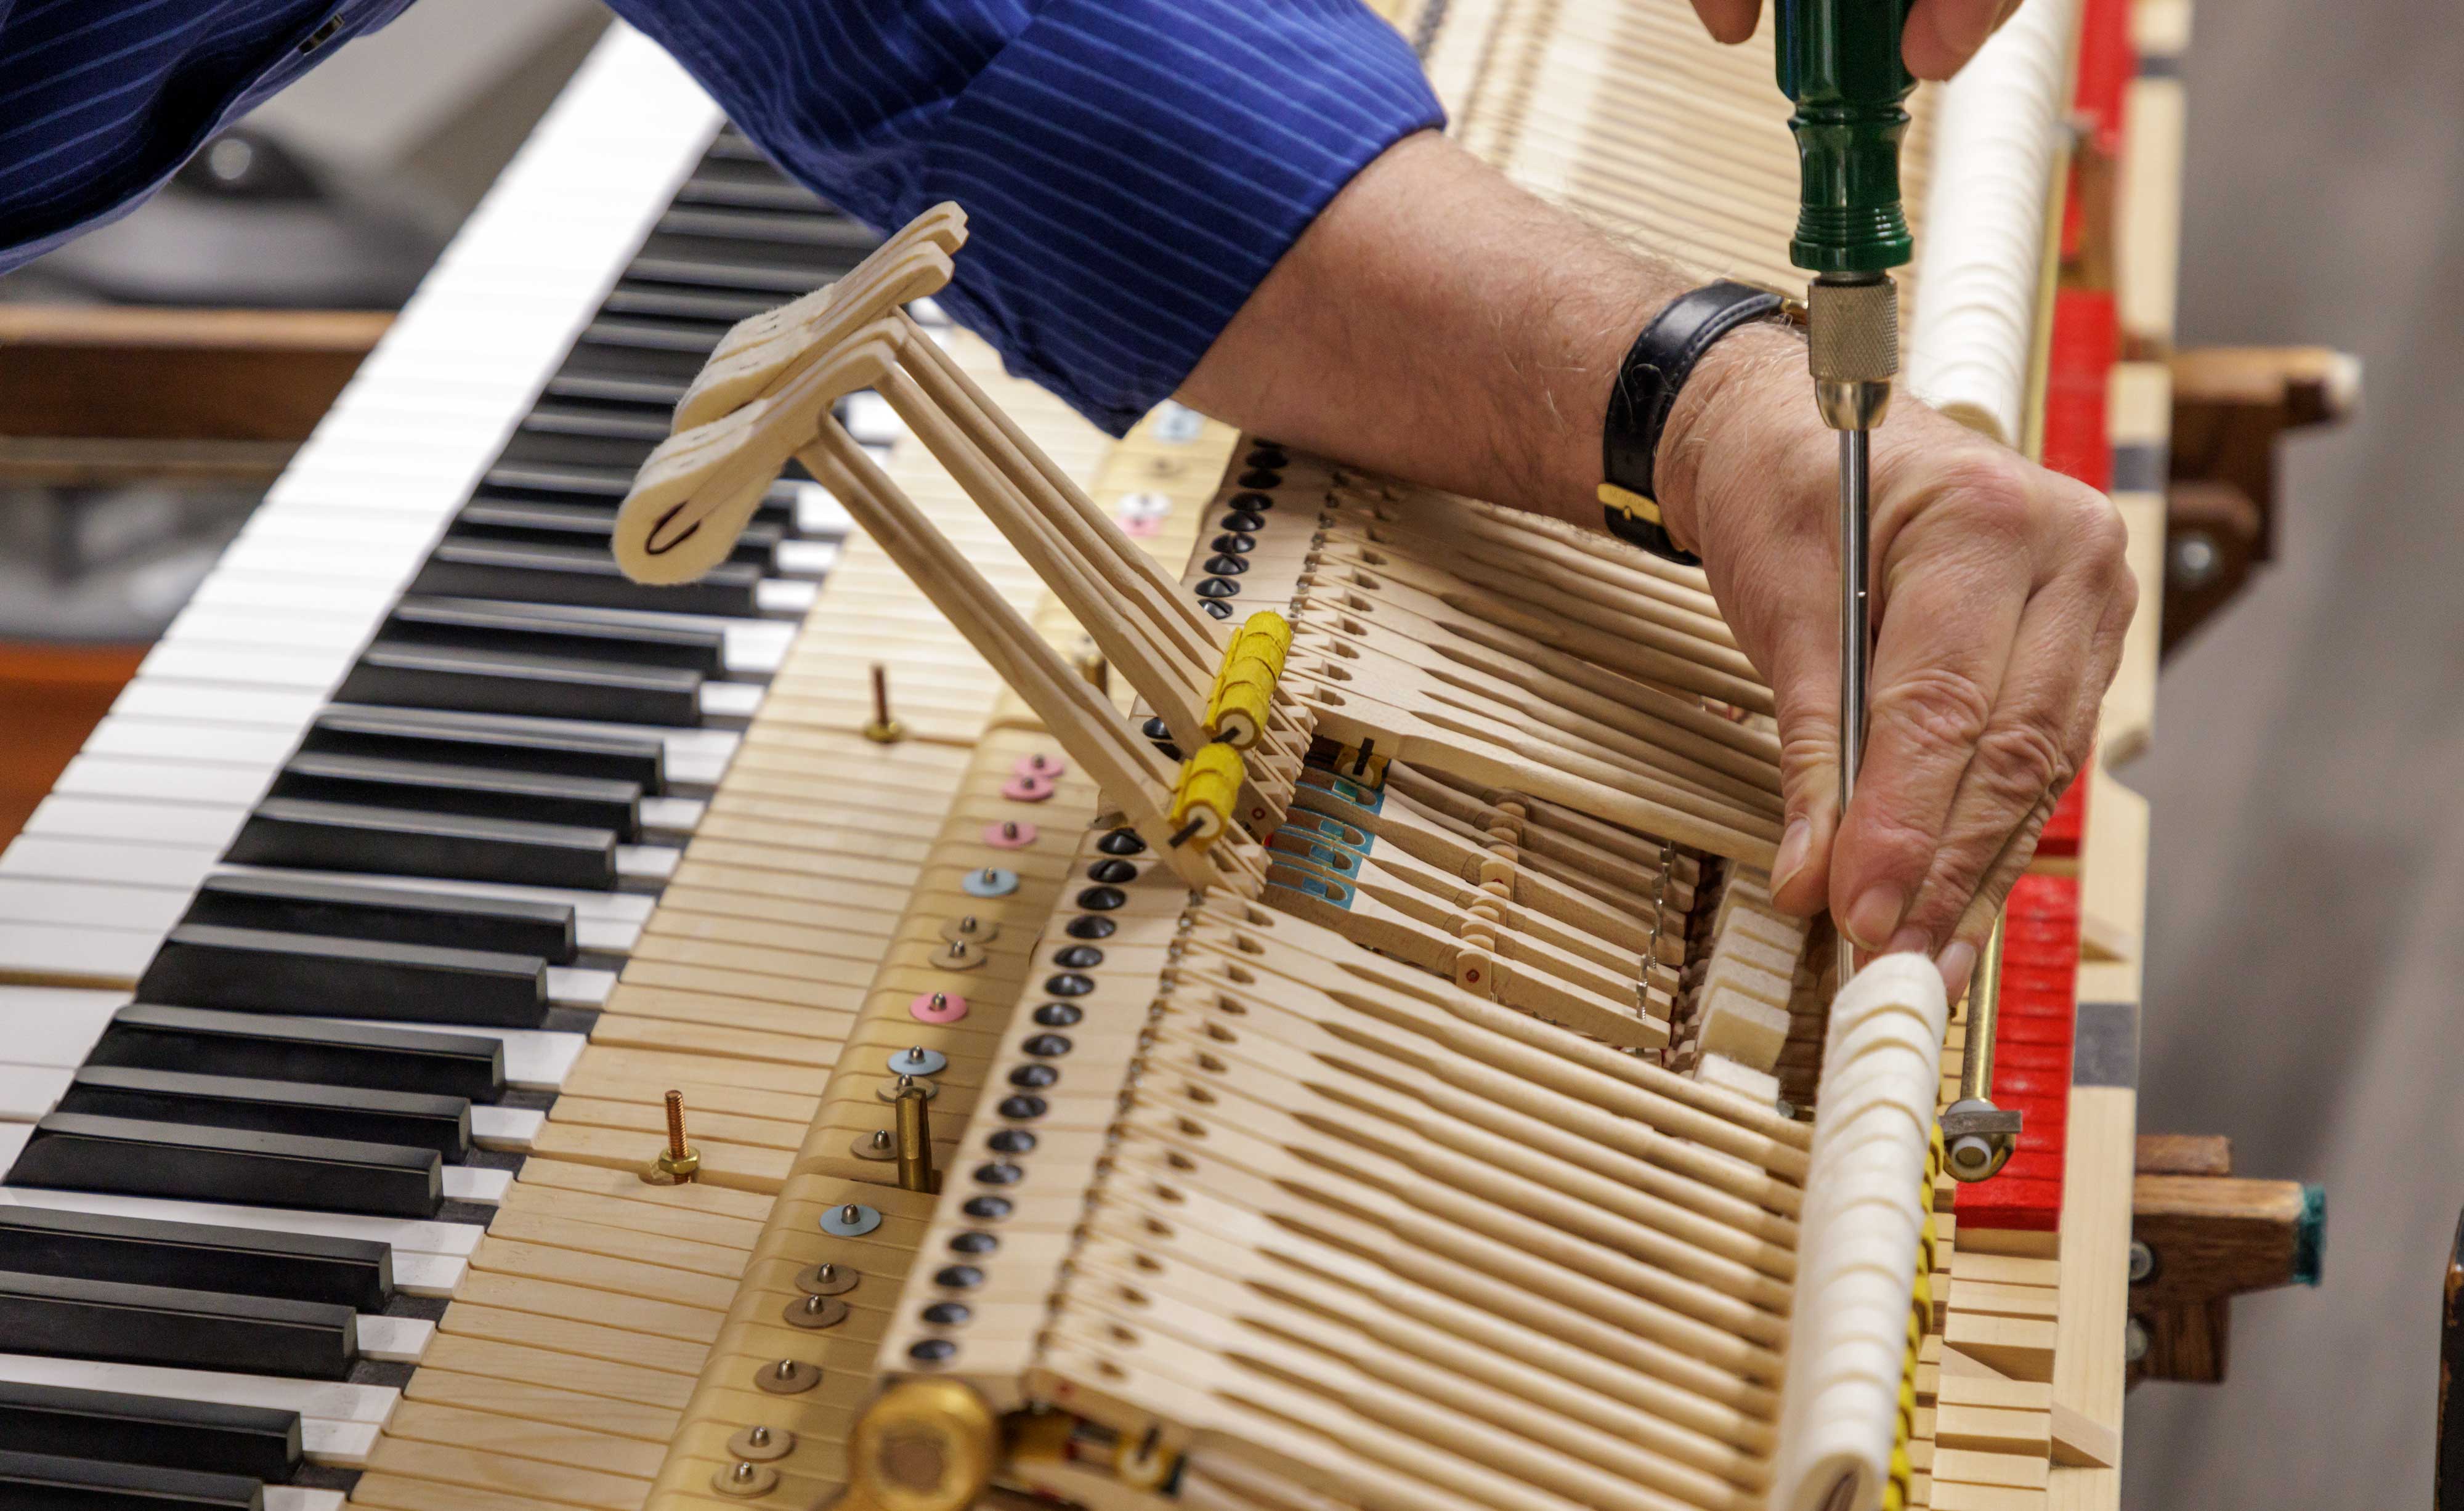 Mrykalo’s workshop has a variety of tools that enable him to work with the smallest parts of a piano.